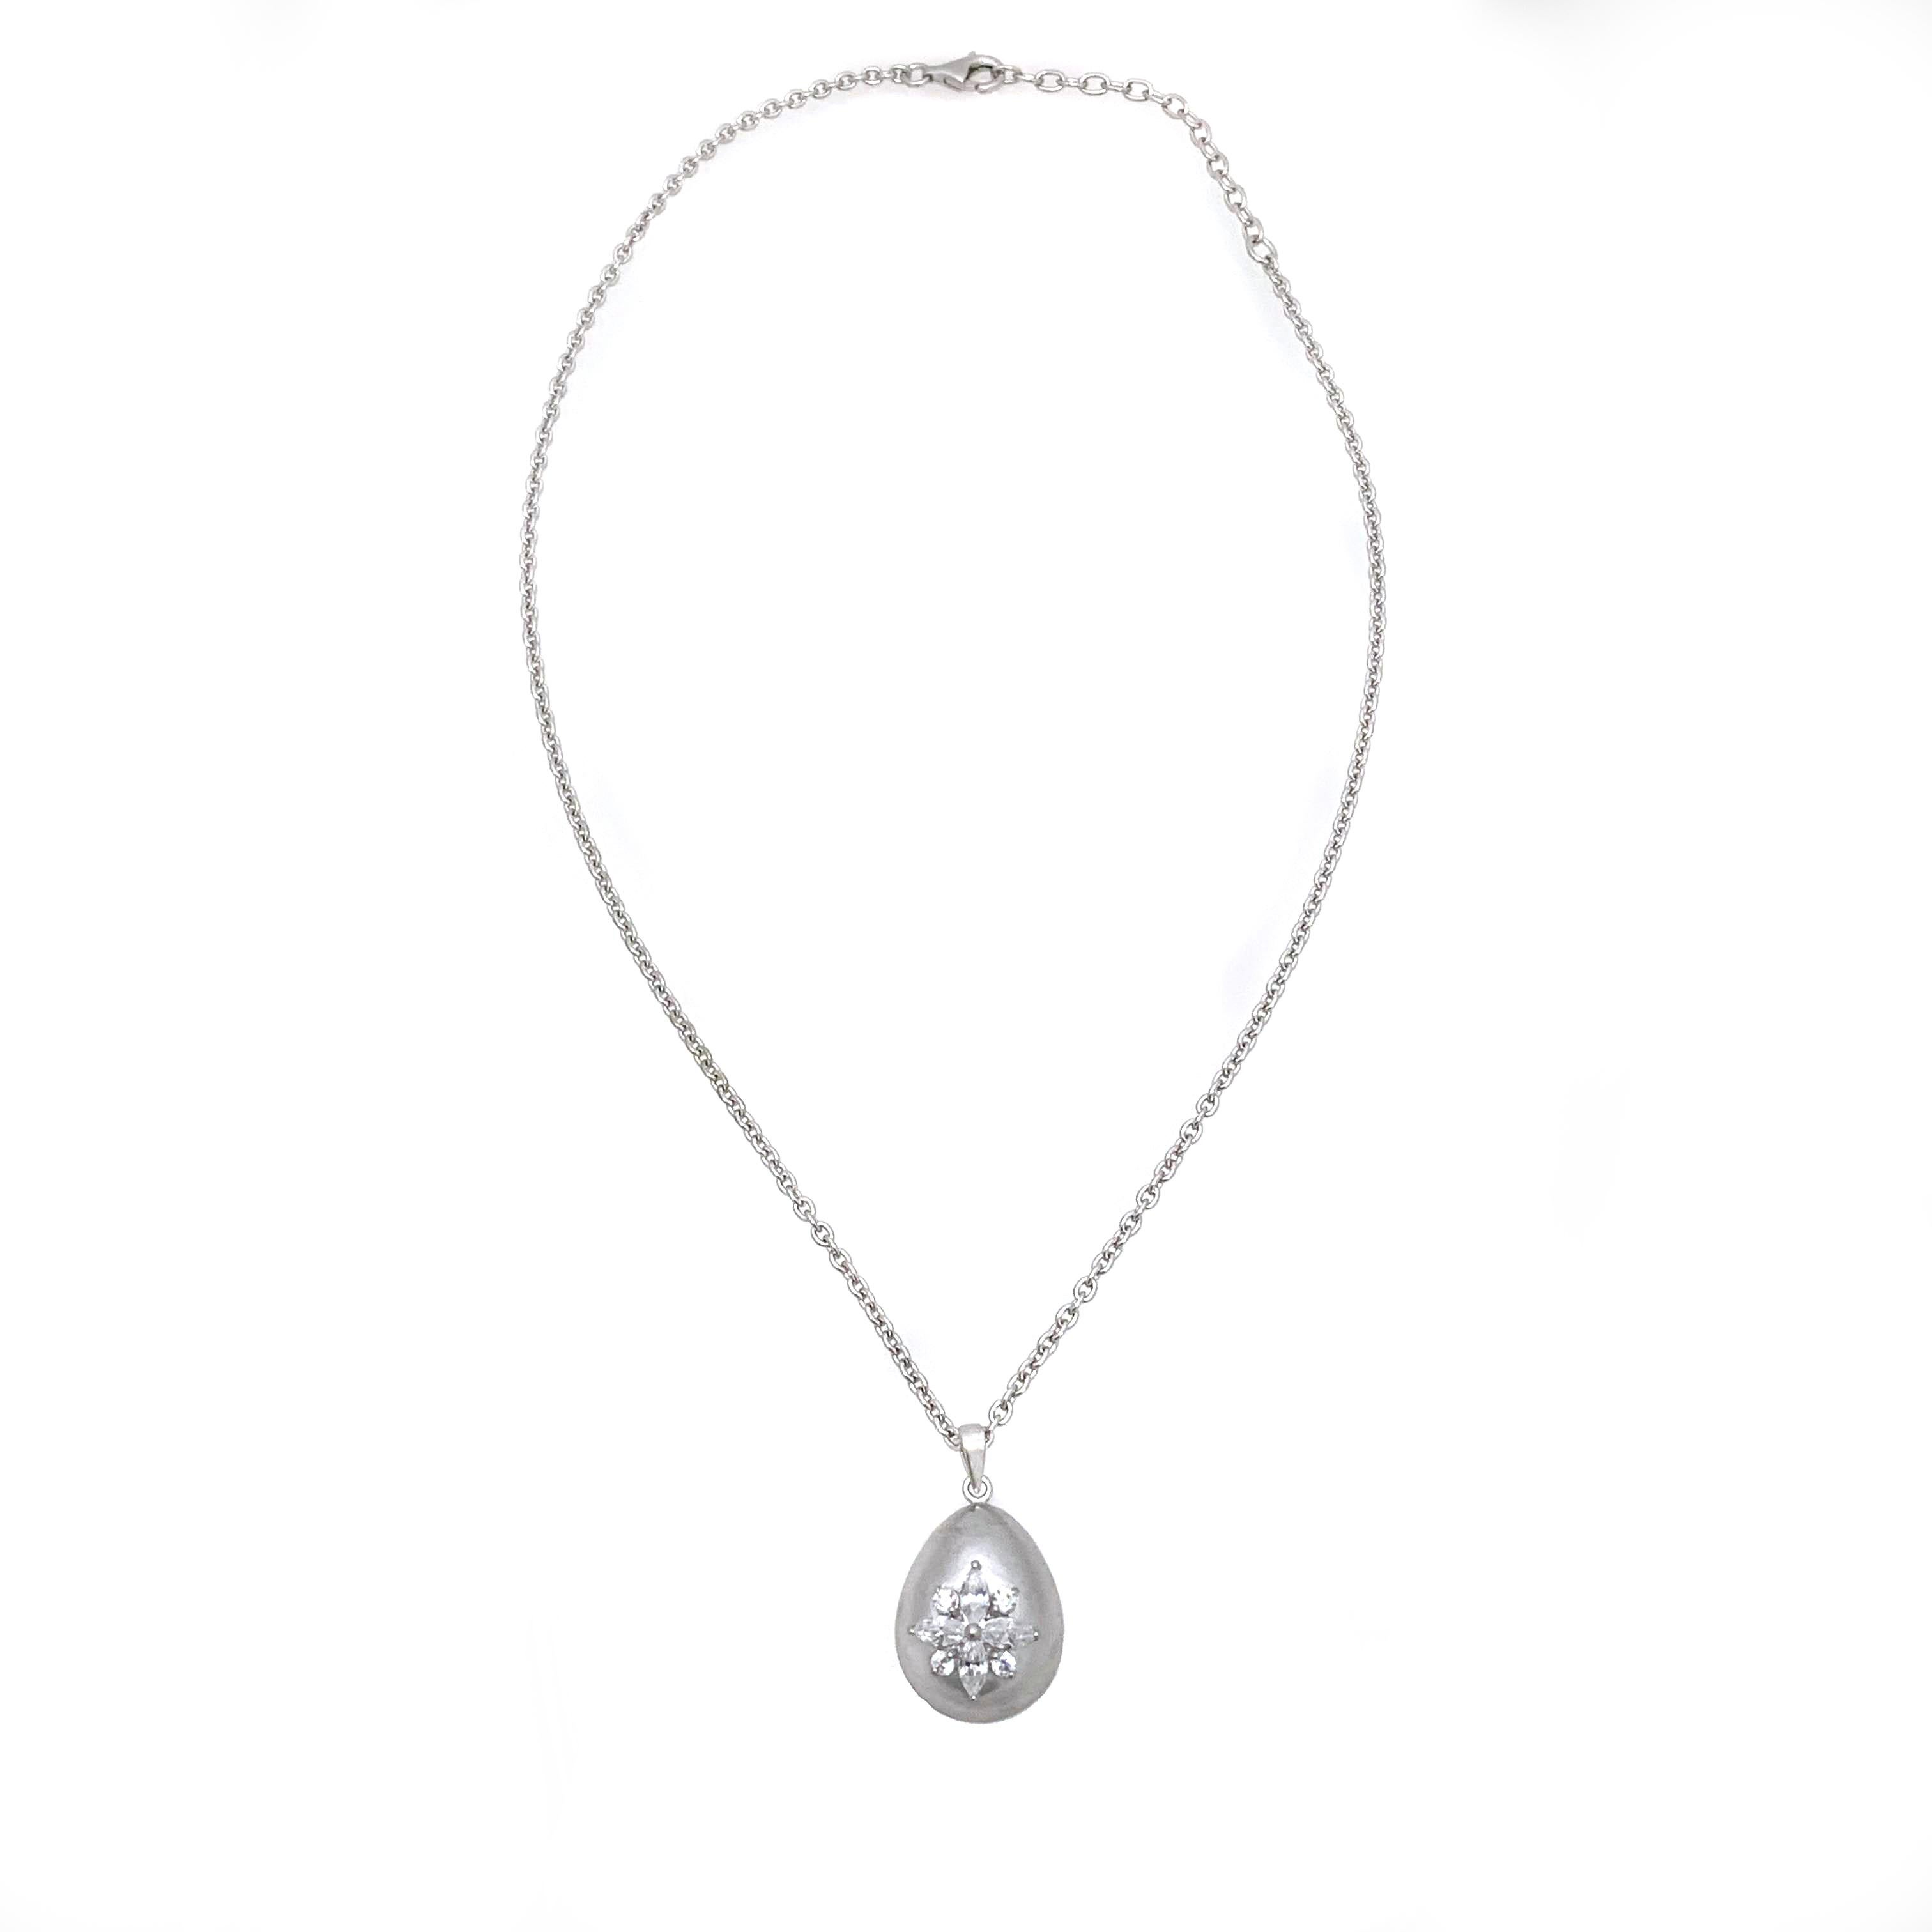 Beautiful egg-shape sterling silver pendant necklace handset with marquis-shape faux diamond cubic zirconia CZ. The pendant features handmade brush satin texturing technique on platinum rhodium plated sterling silver. The chain necklace is solid 3mm